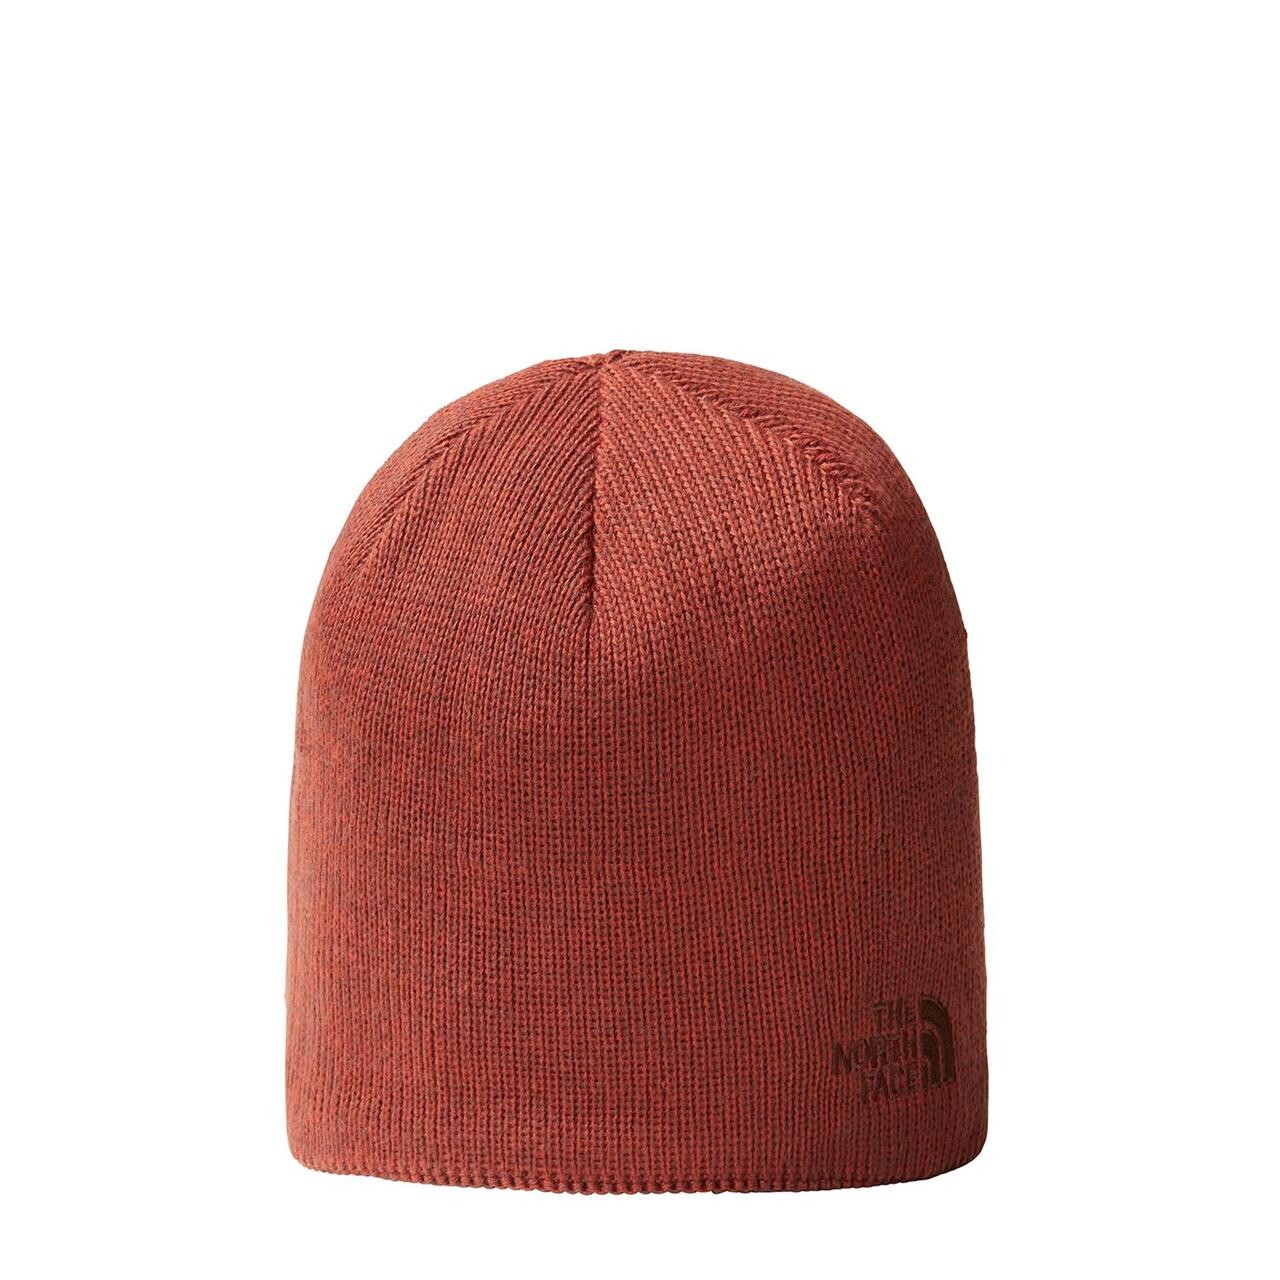 #3 - The North Face Bones Recycled Beanie (Brun (BRANDY BROWN HEATHER) One size)